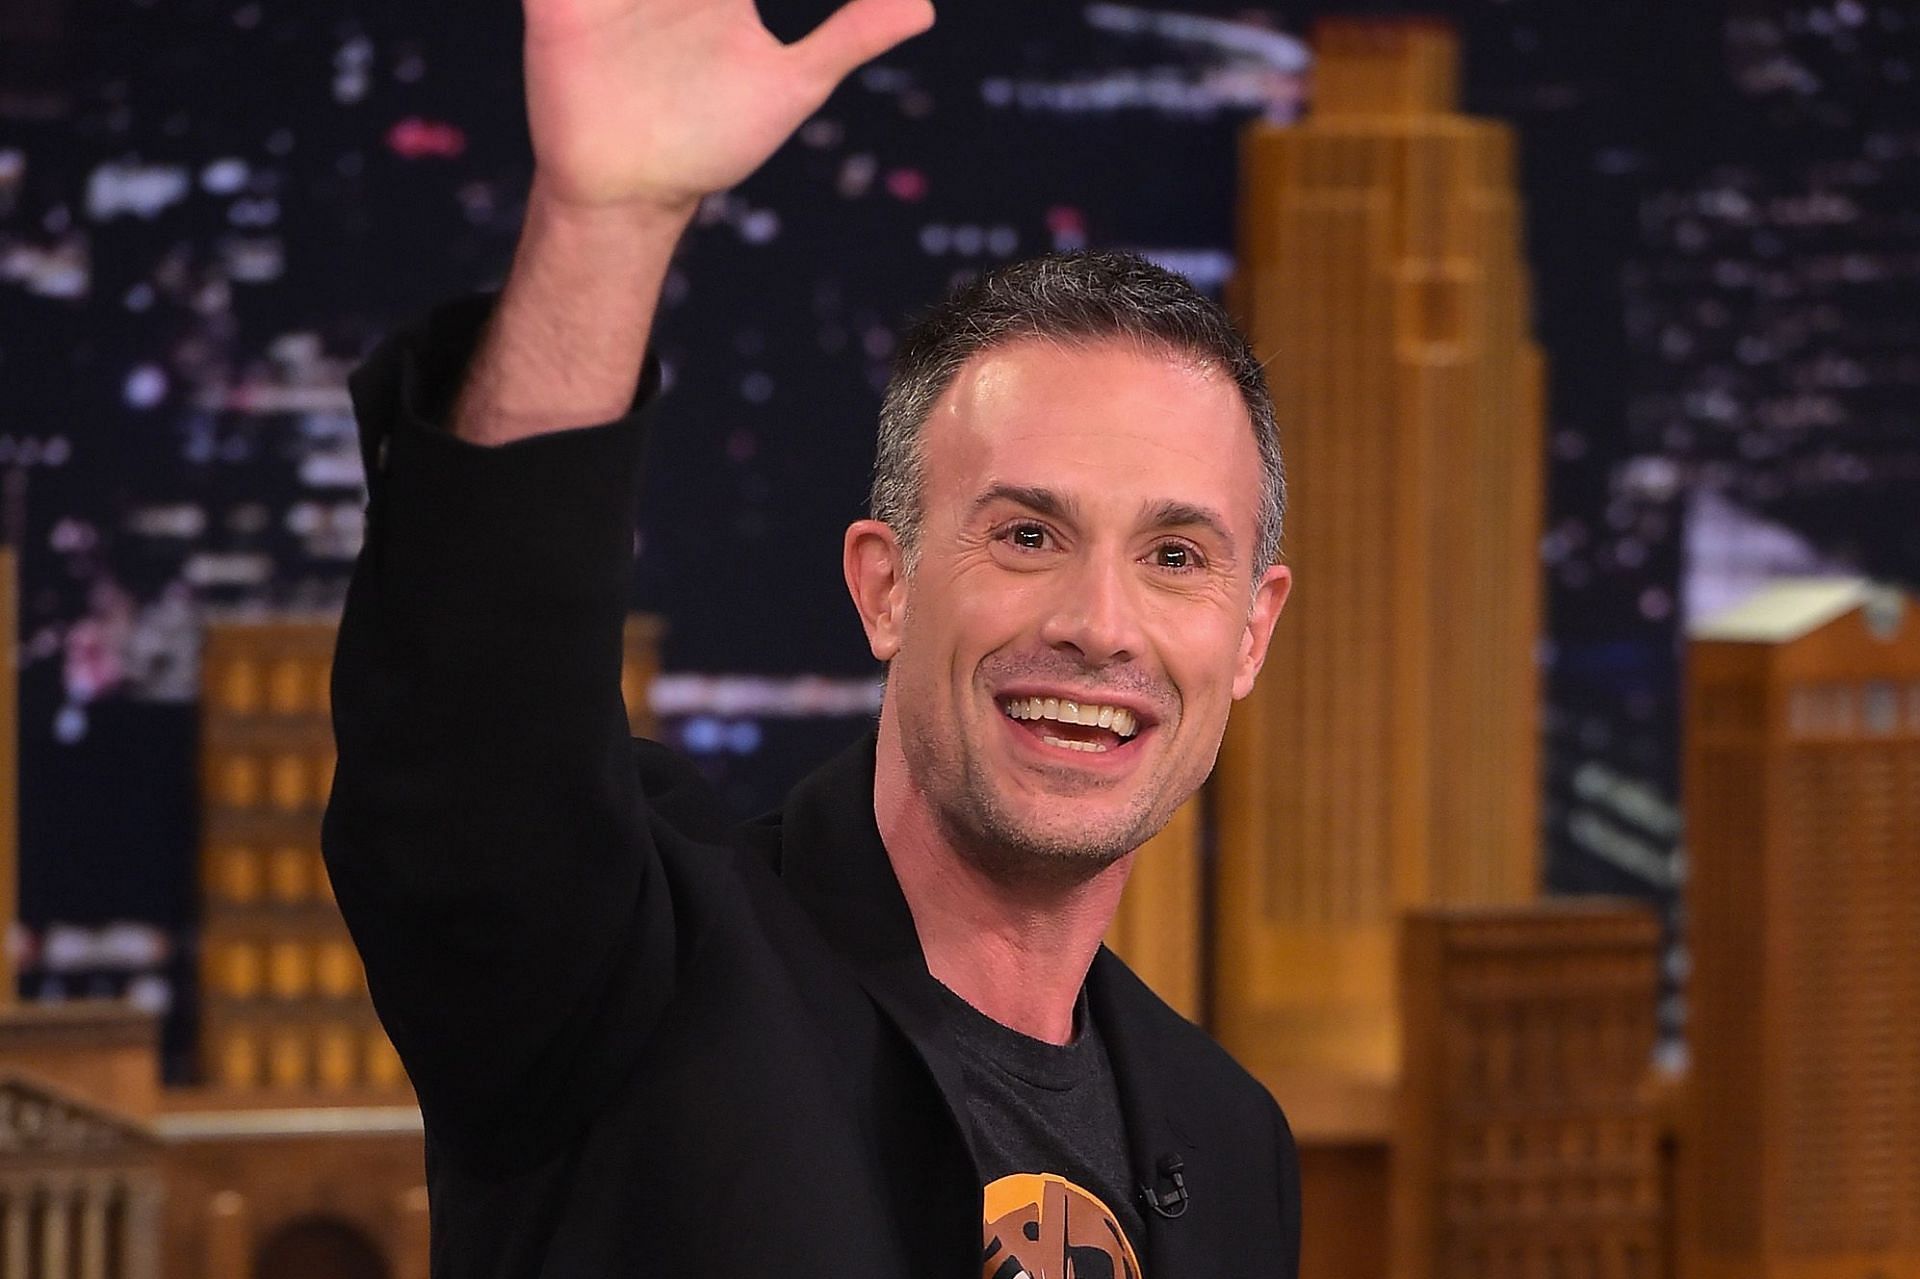 Freddie Prinze Jr. expresses frustration with returning to the Star Wars franchise and feeling that each return dilutes his character&#039;s impact (Image via The Jimmy Fallon Show)